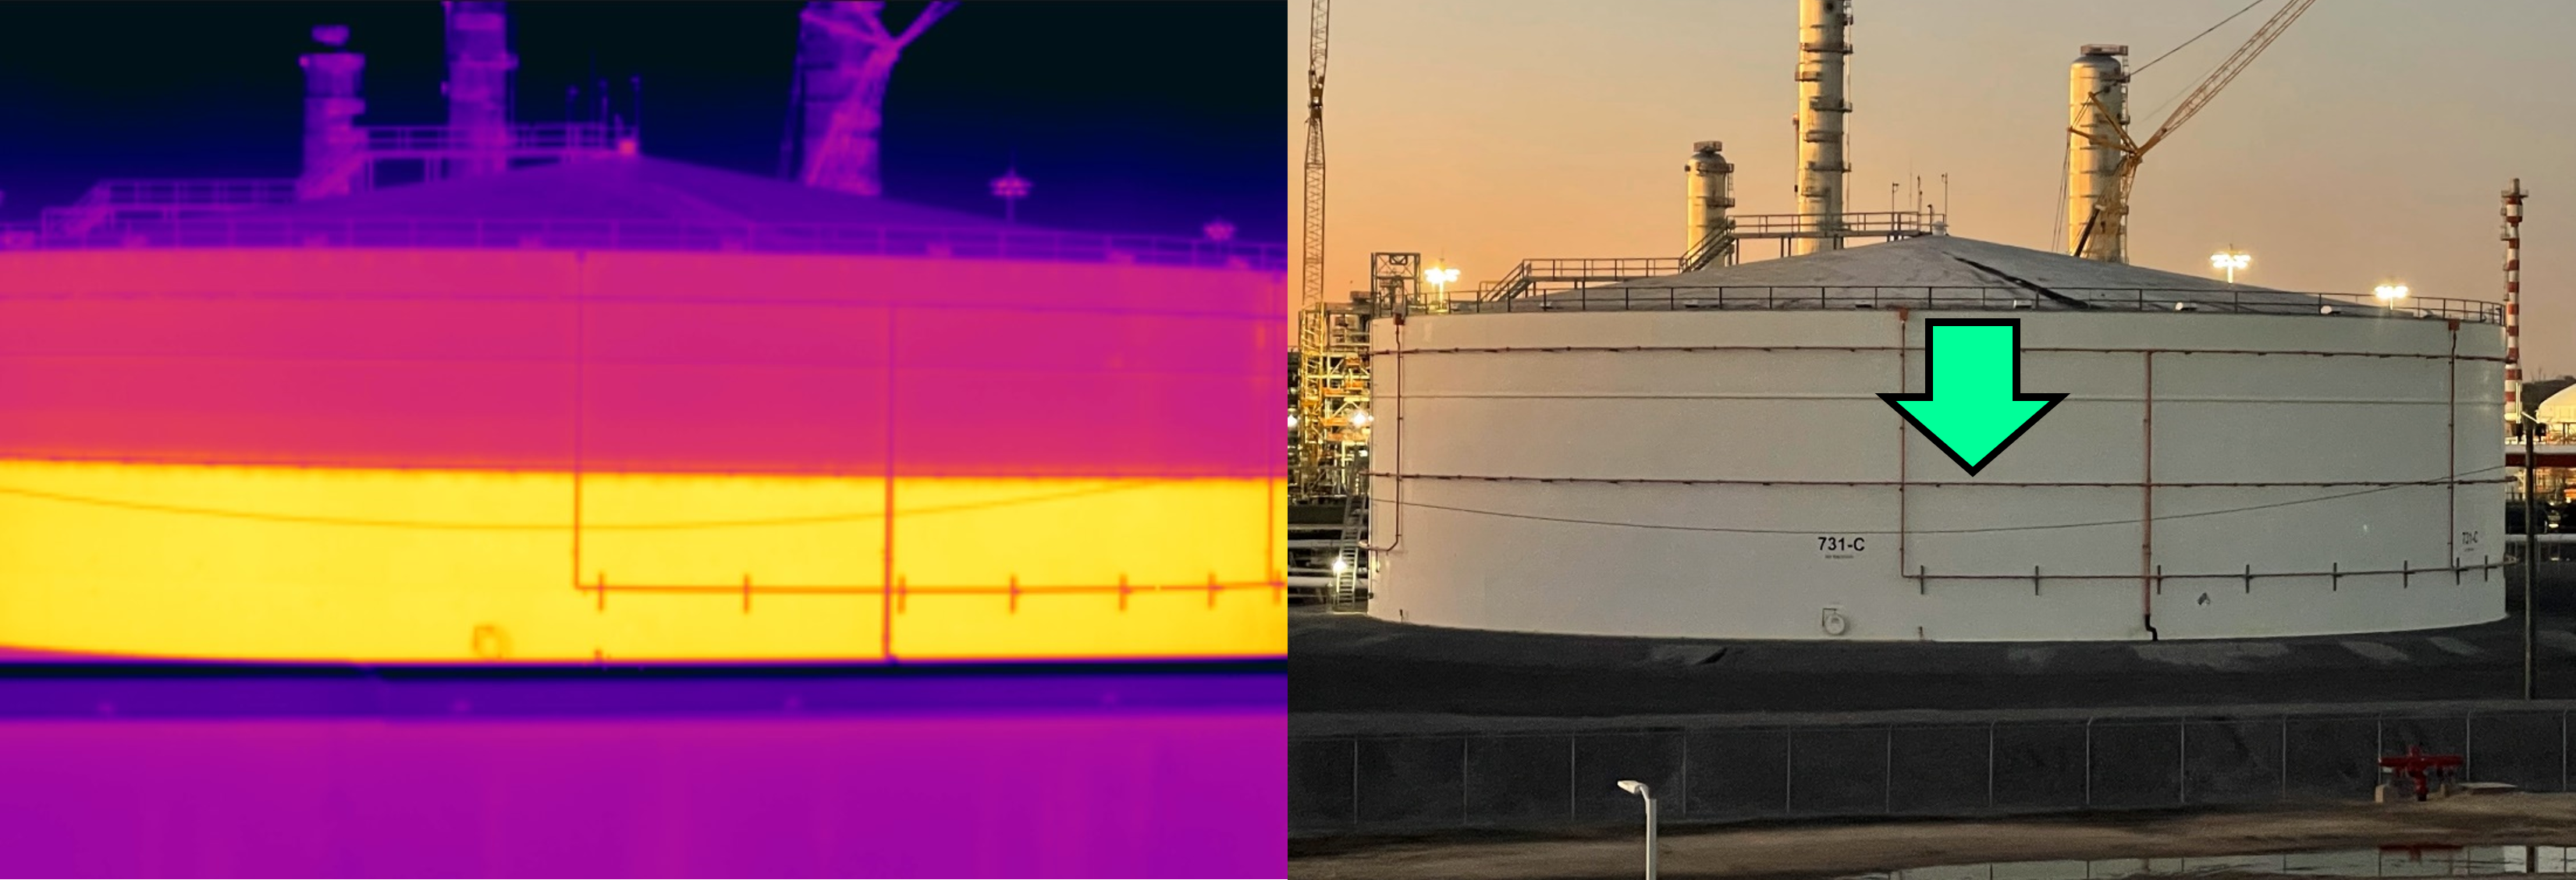 Thermogram shows relative height of liquid contained in a large outdoor storage vessel.